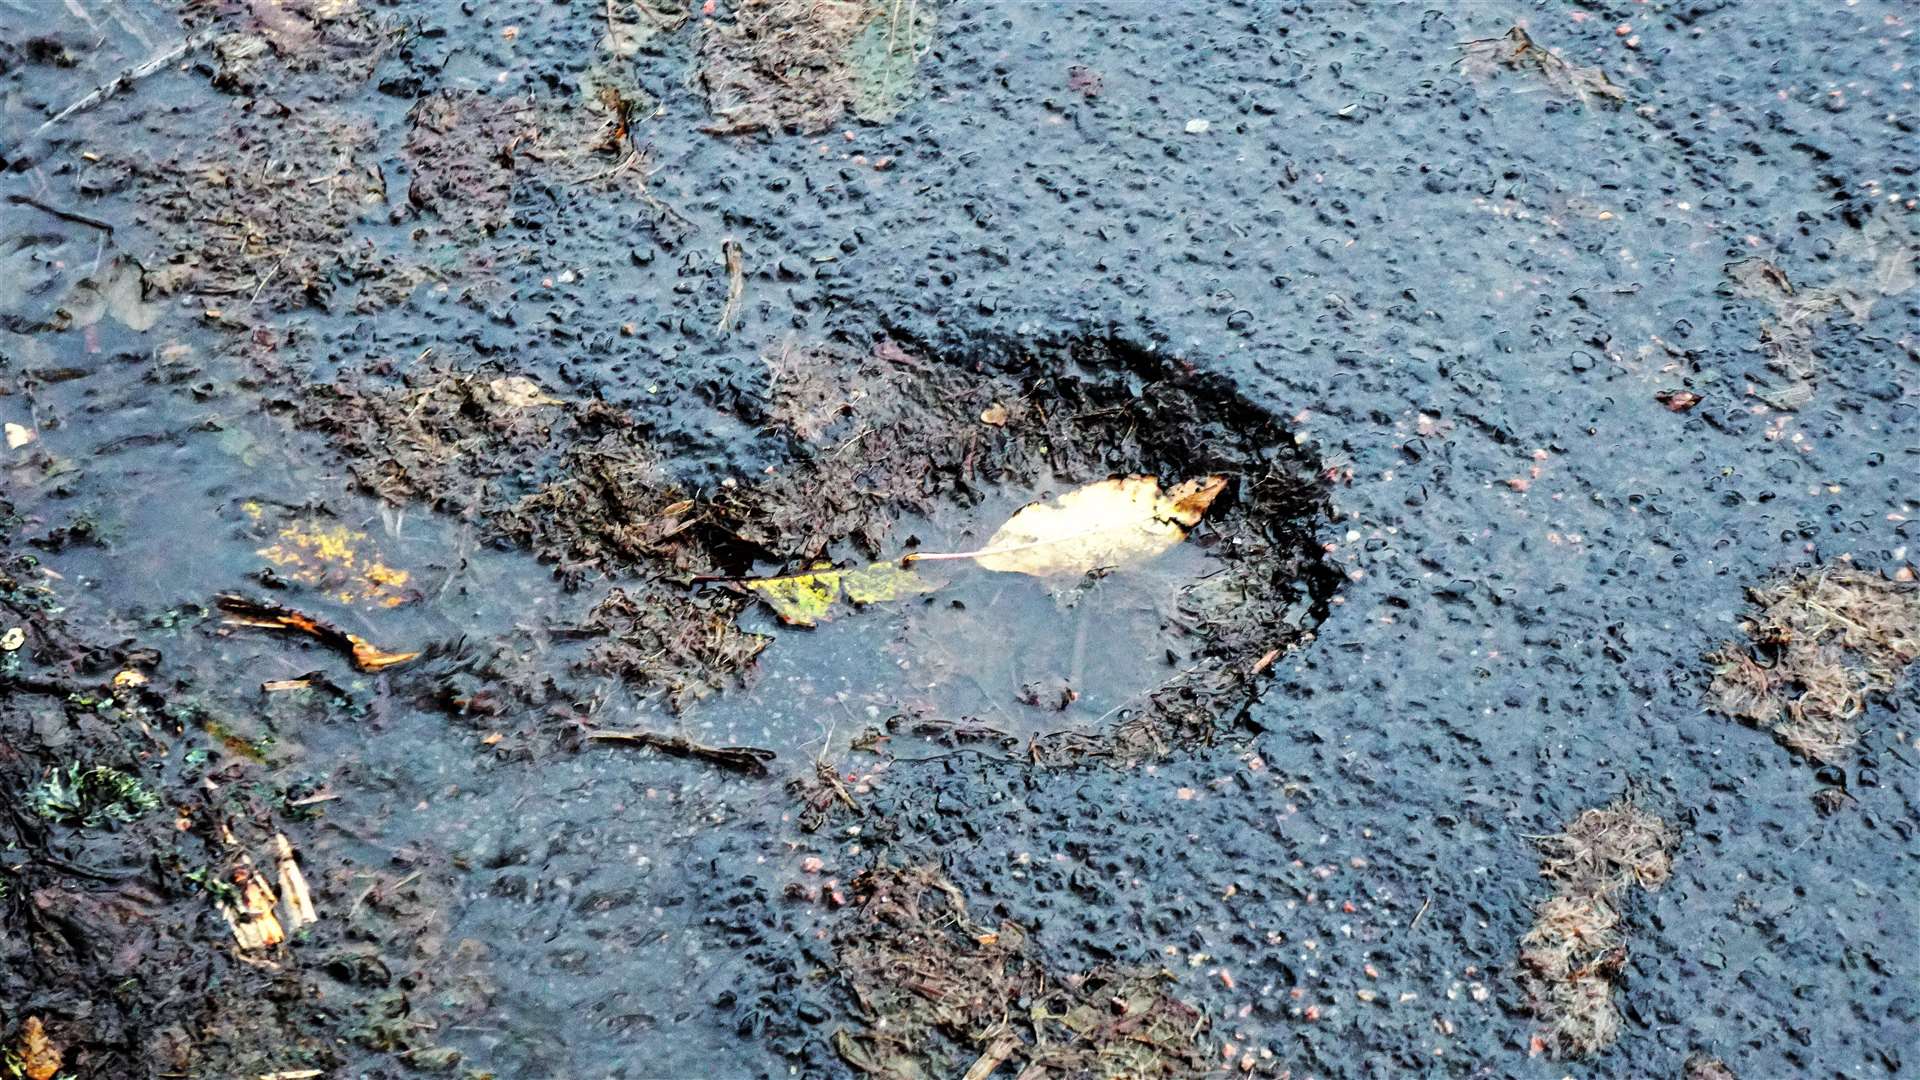 The pothole that the wheel got stuck in. Picture: DGS